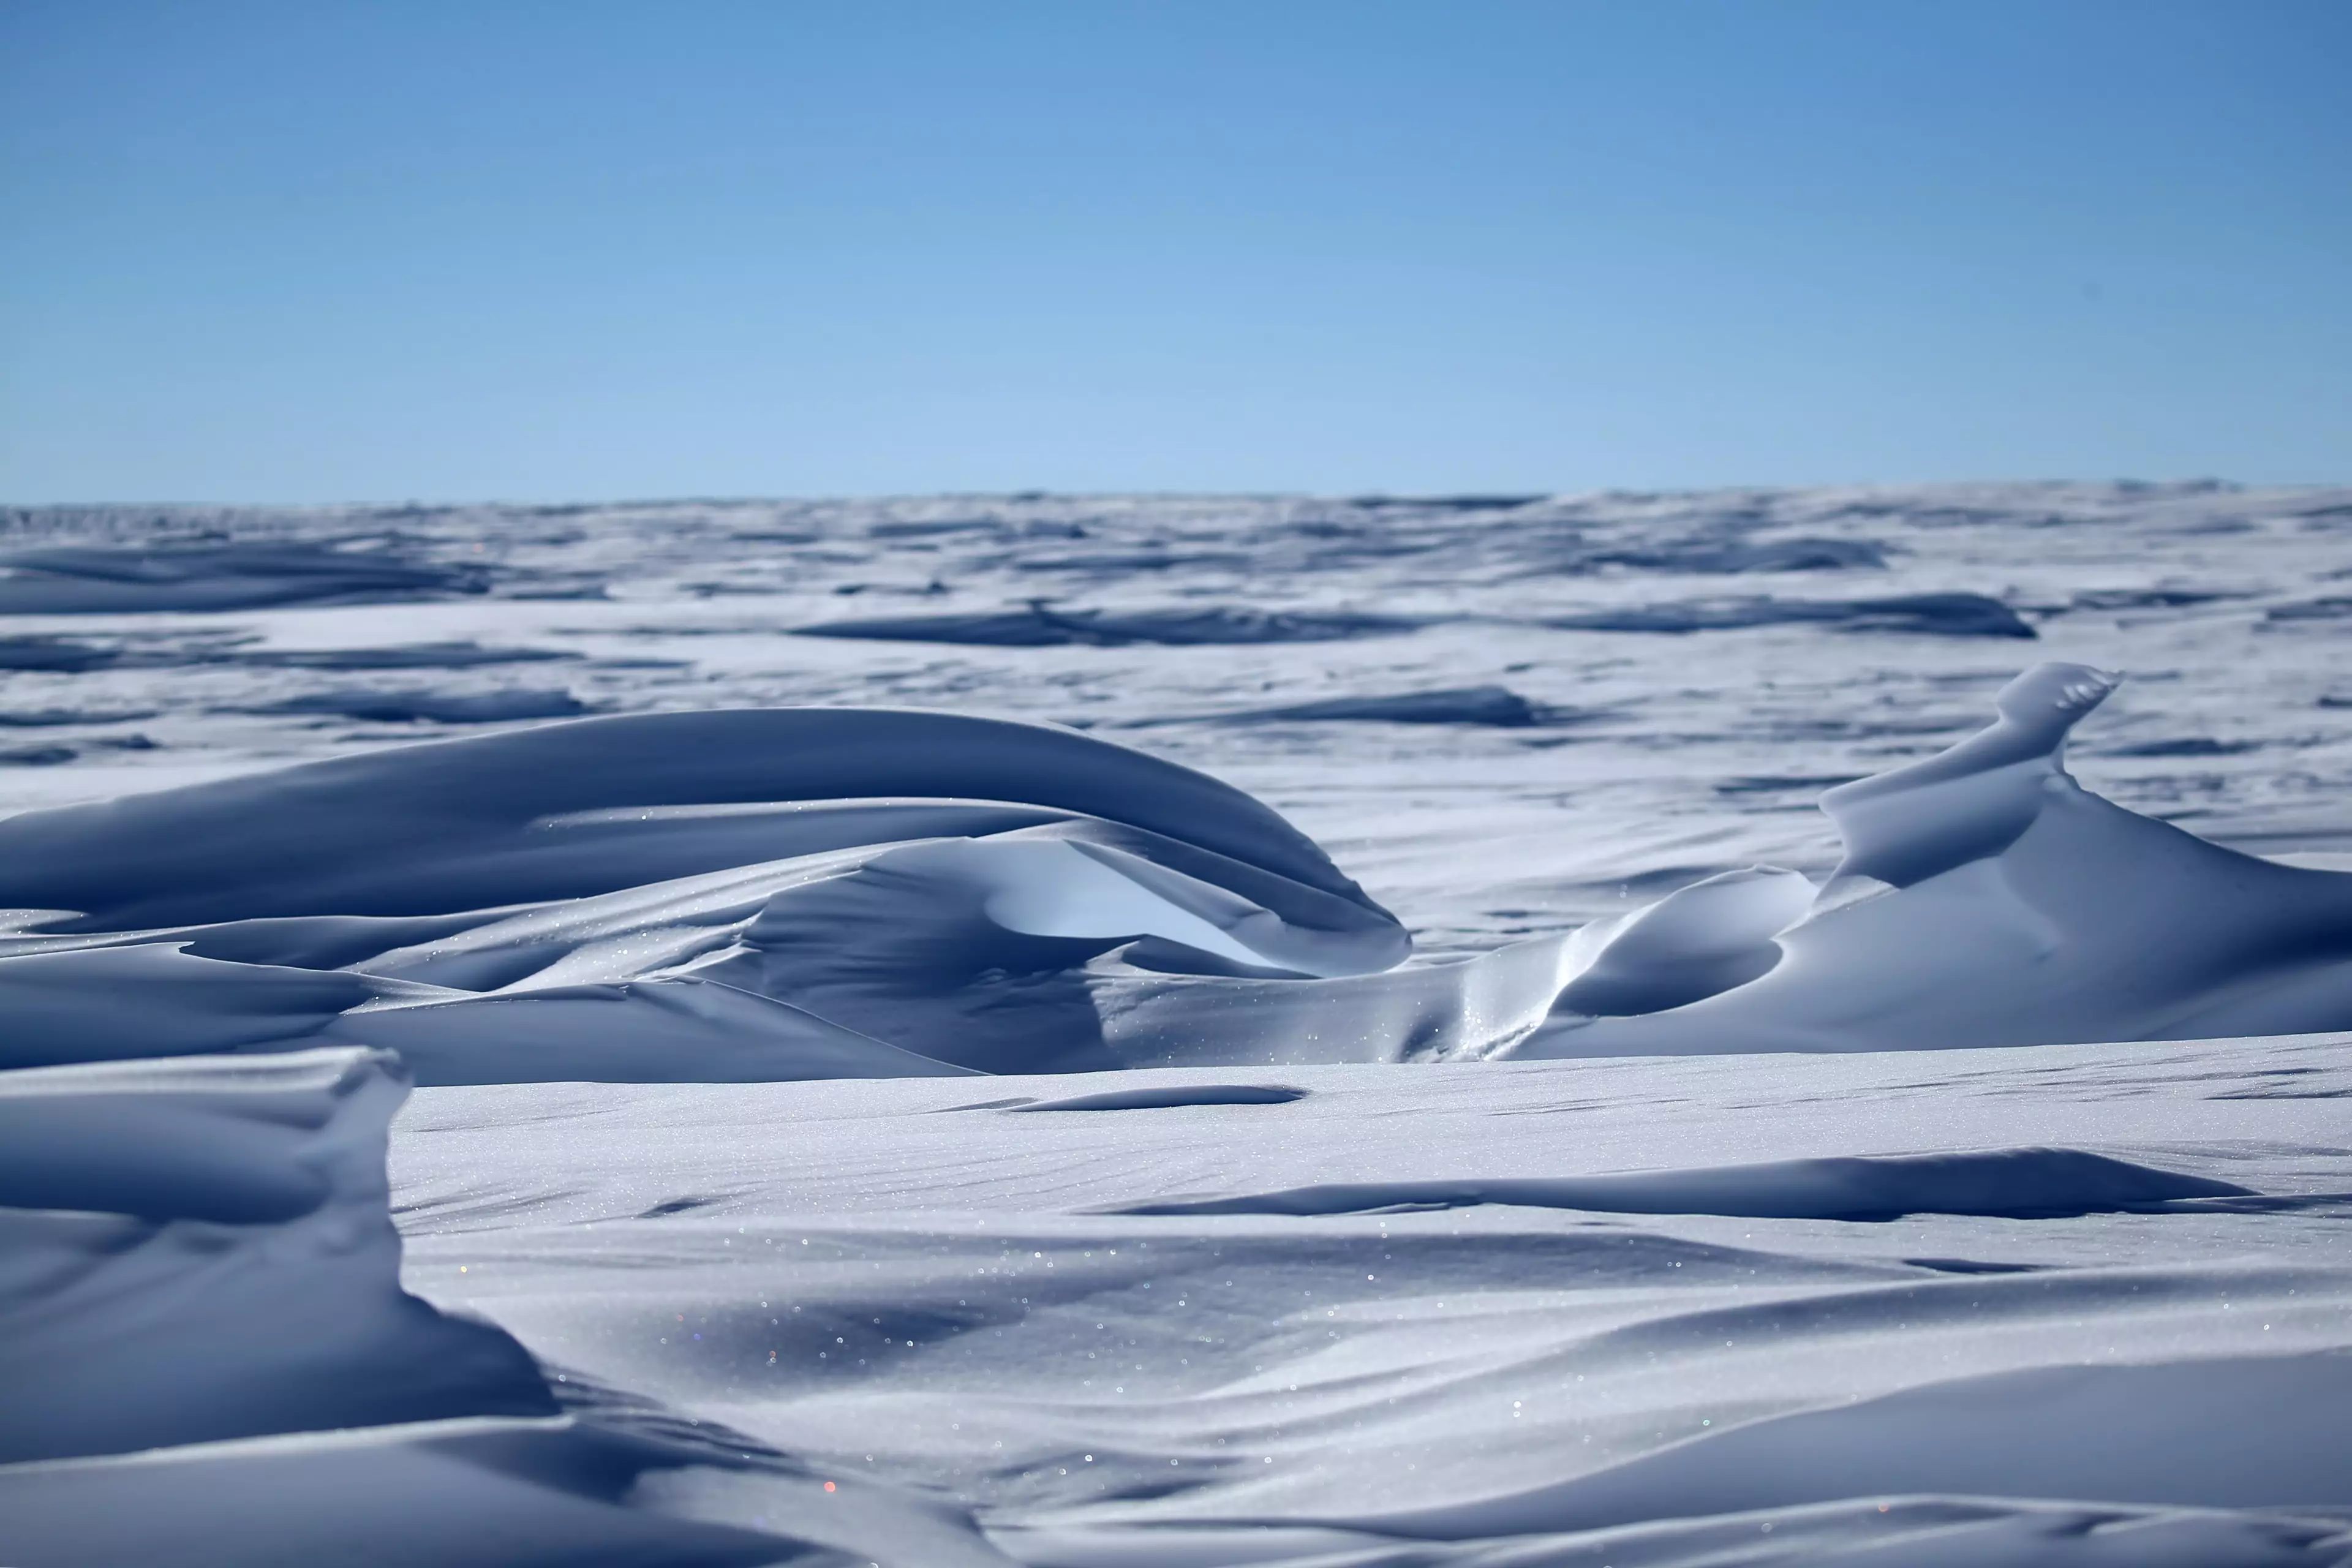 The South Pole is warming three times quicker than the rest of the planet, a study has found.